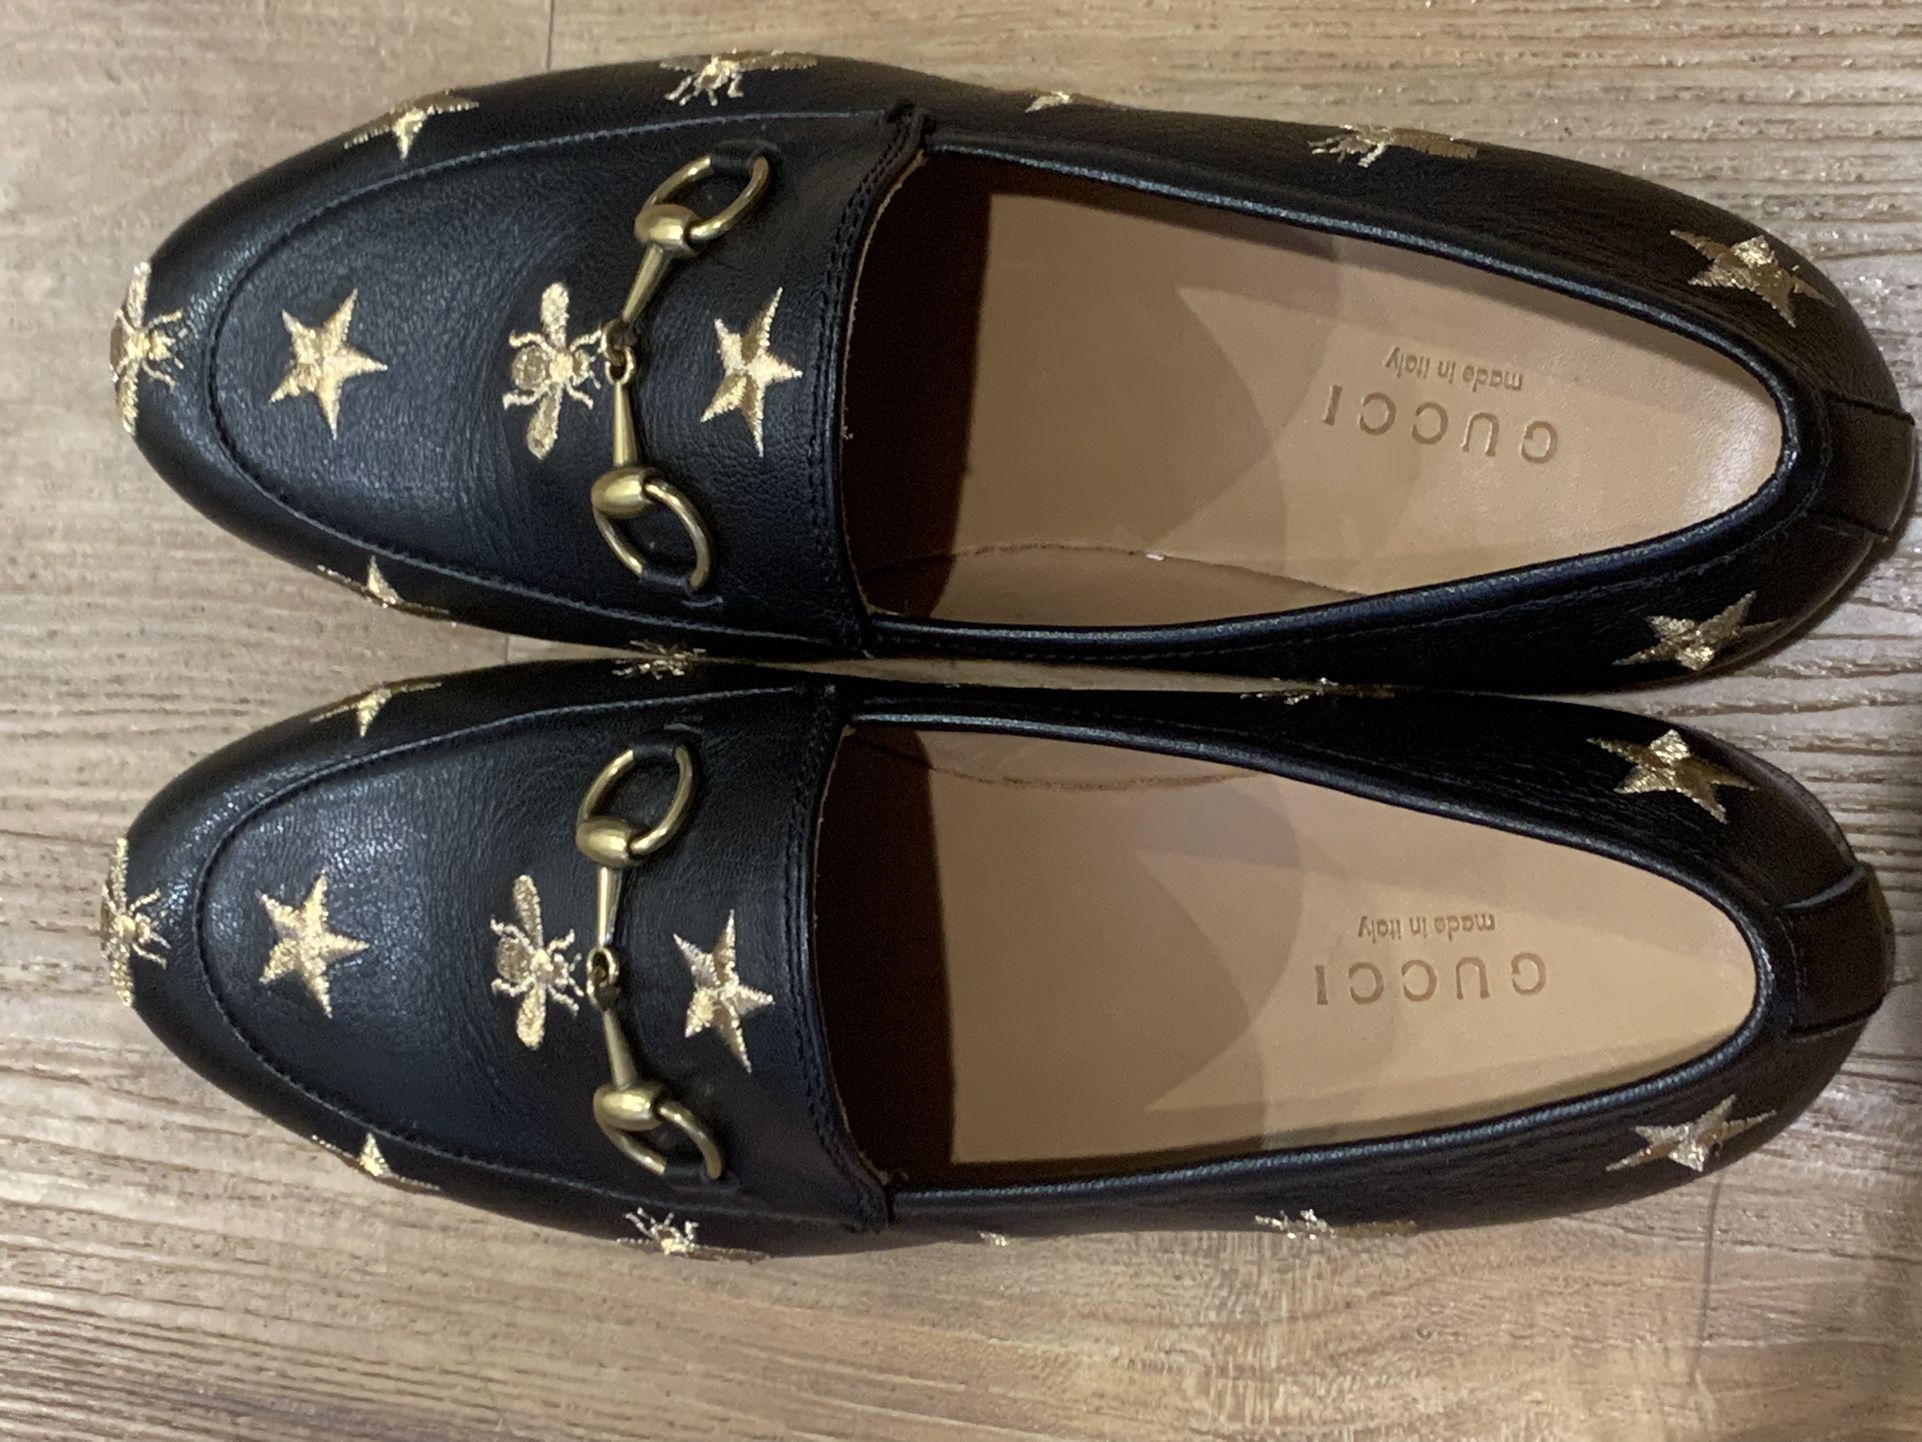 Gucci Bee and Star women’s size M37 (like new)